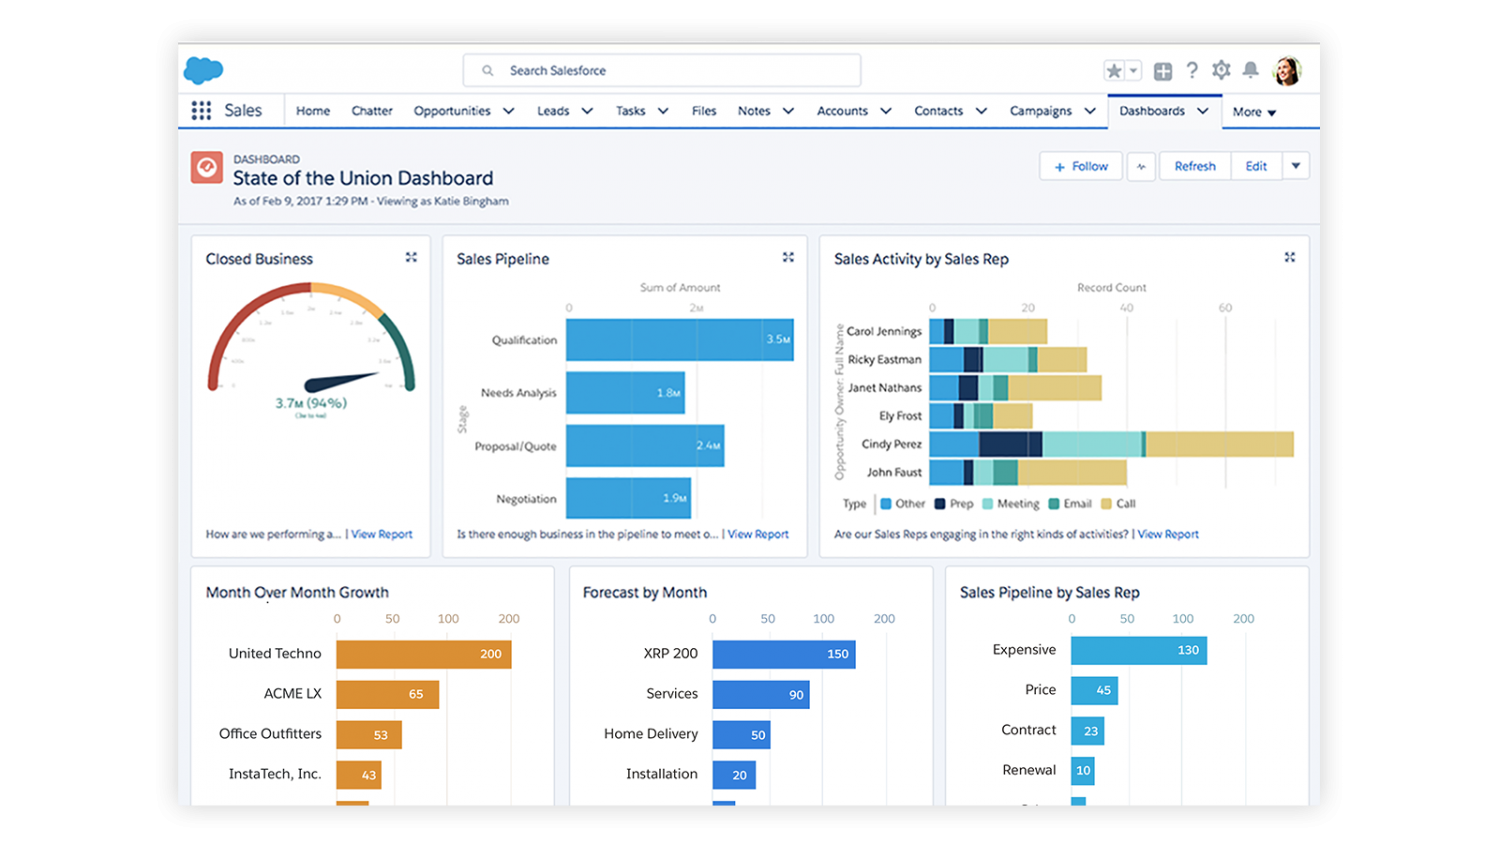 Screenshot of "State of the Union" dashboard in Salesforce, showing metrics like Closed Business, Sales Pipeline, and Sales Activity by Sales Rep.